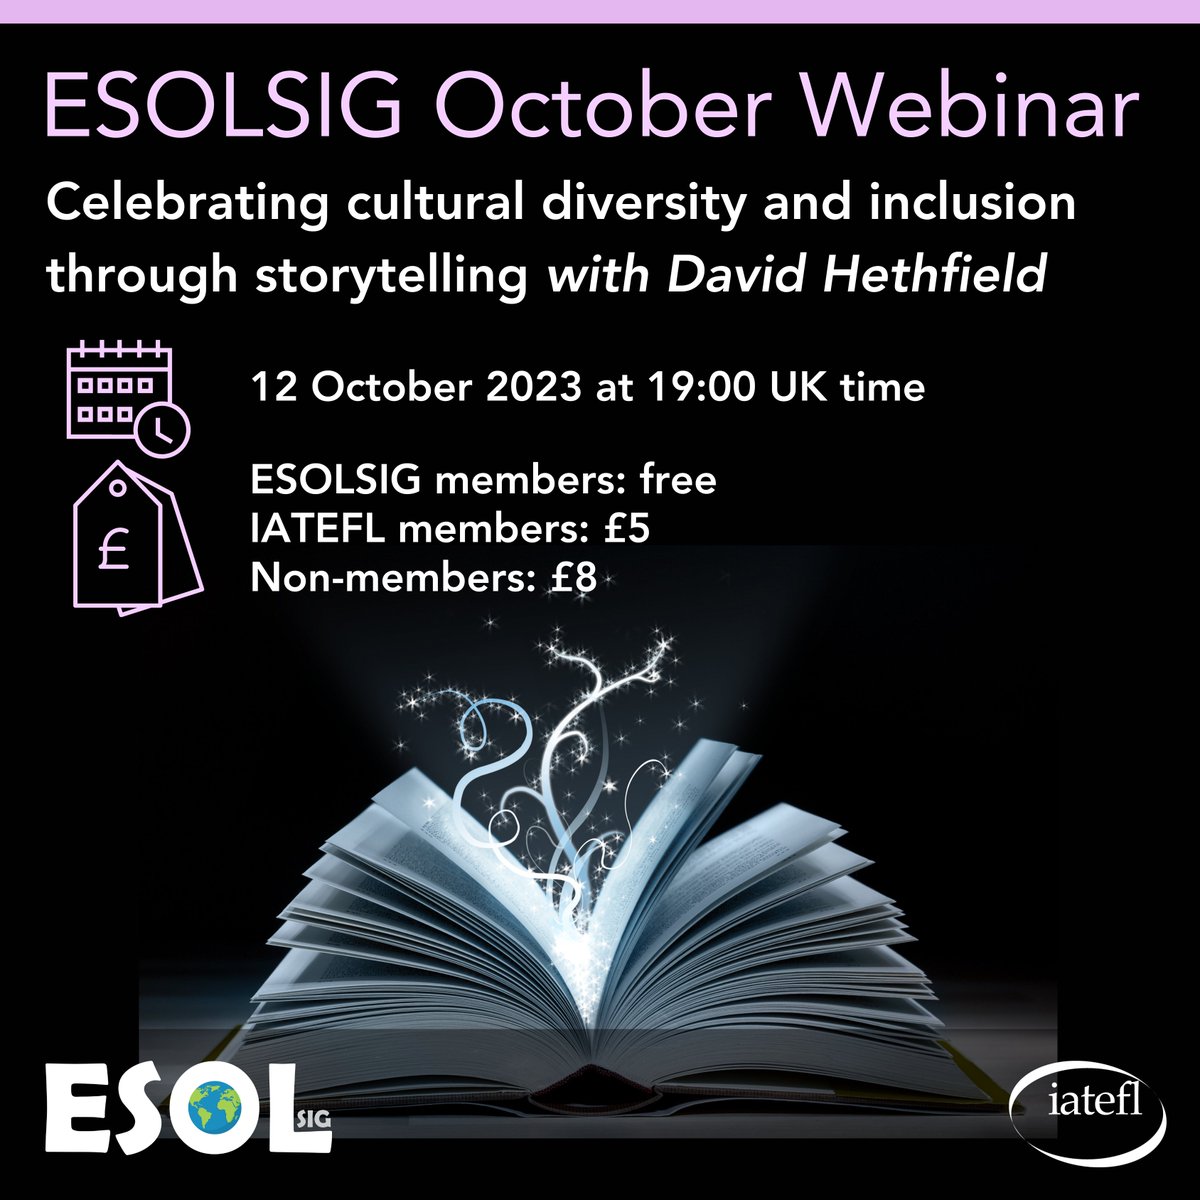 📢Bookings for our October event open! Join our webinar with international storyteller, David Hethfield and you will learn how to tell a new story and explore cultural identity through folk stories. See you on October 12 at 7pm UK time. 📅Bookings: iatefl.org/events/464 #iatefl